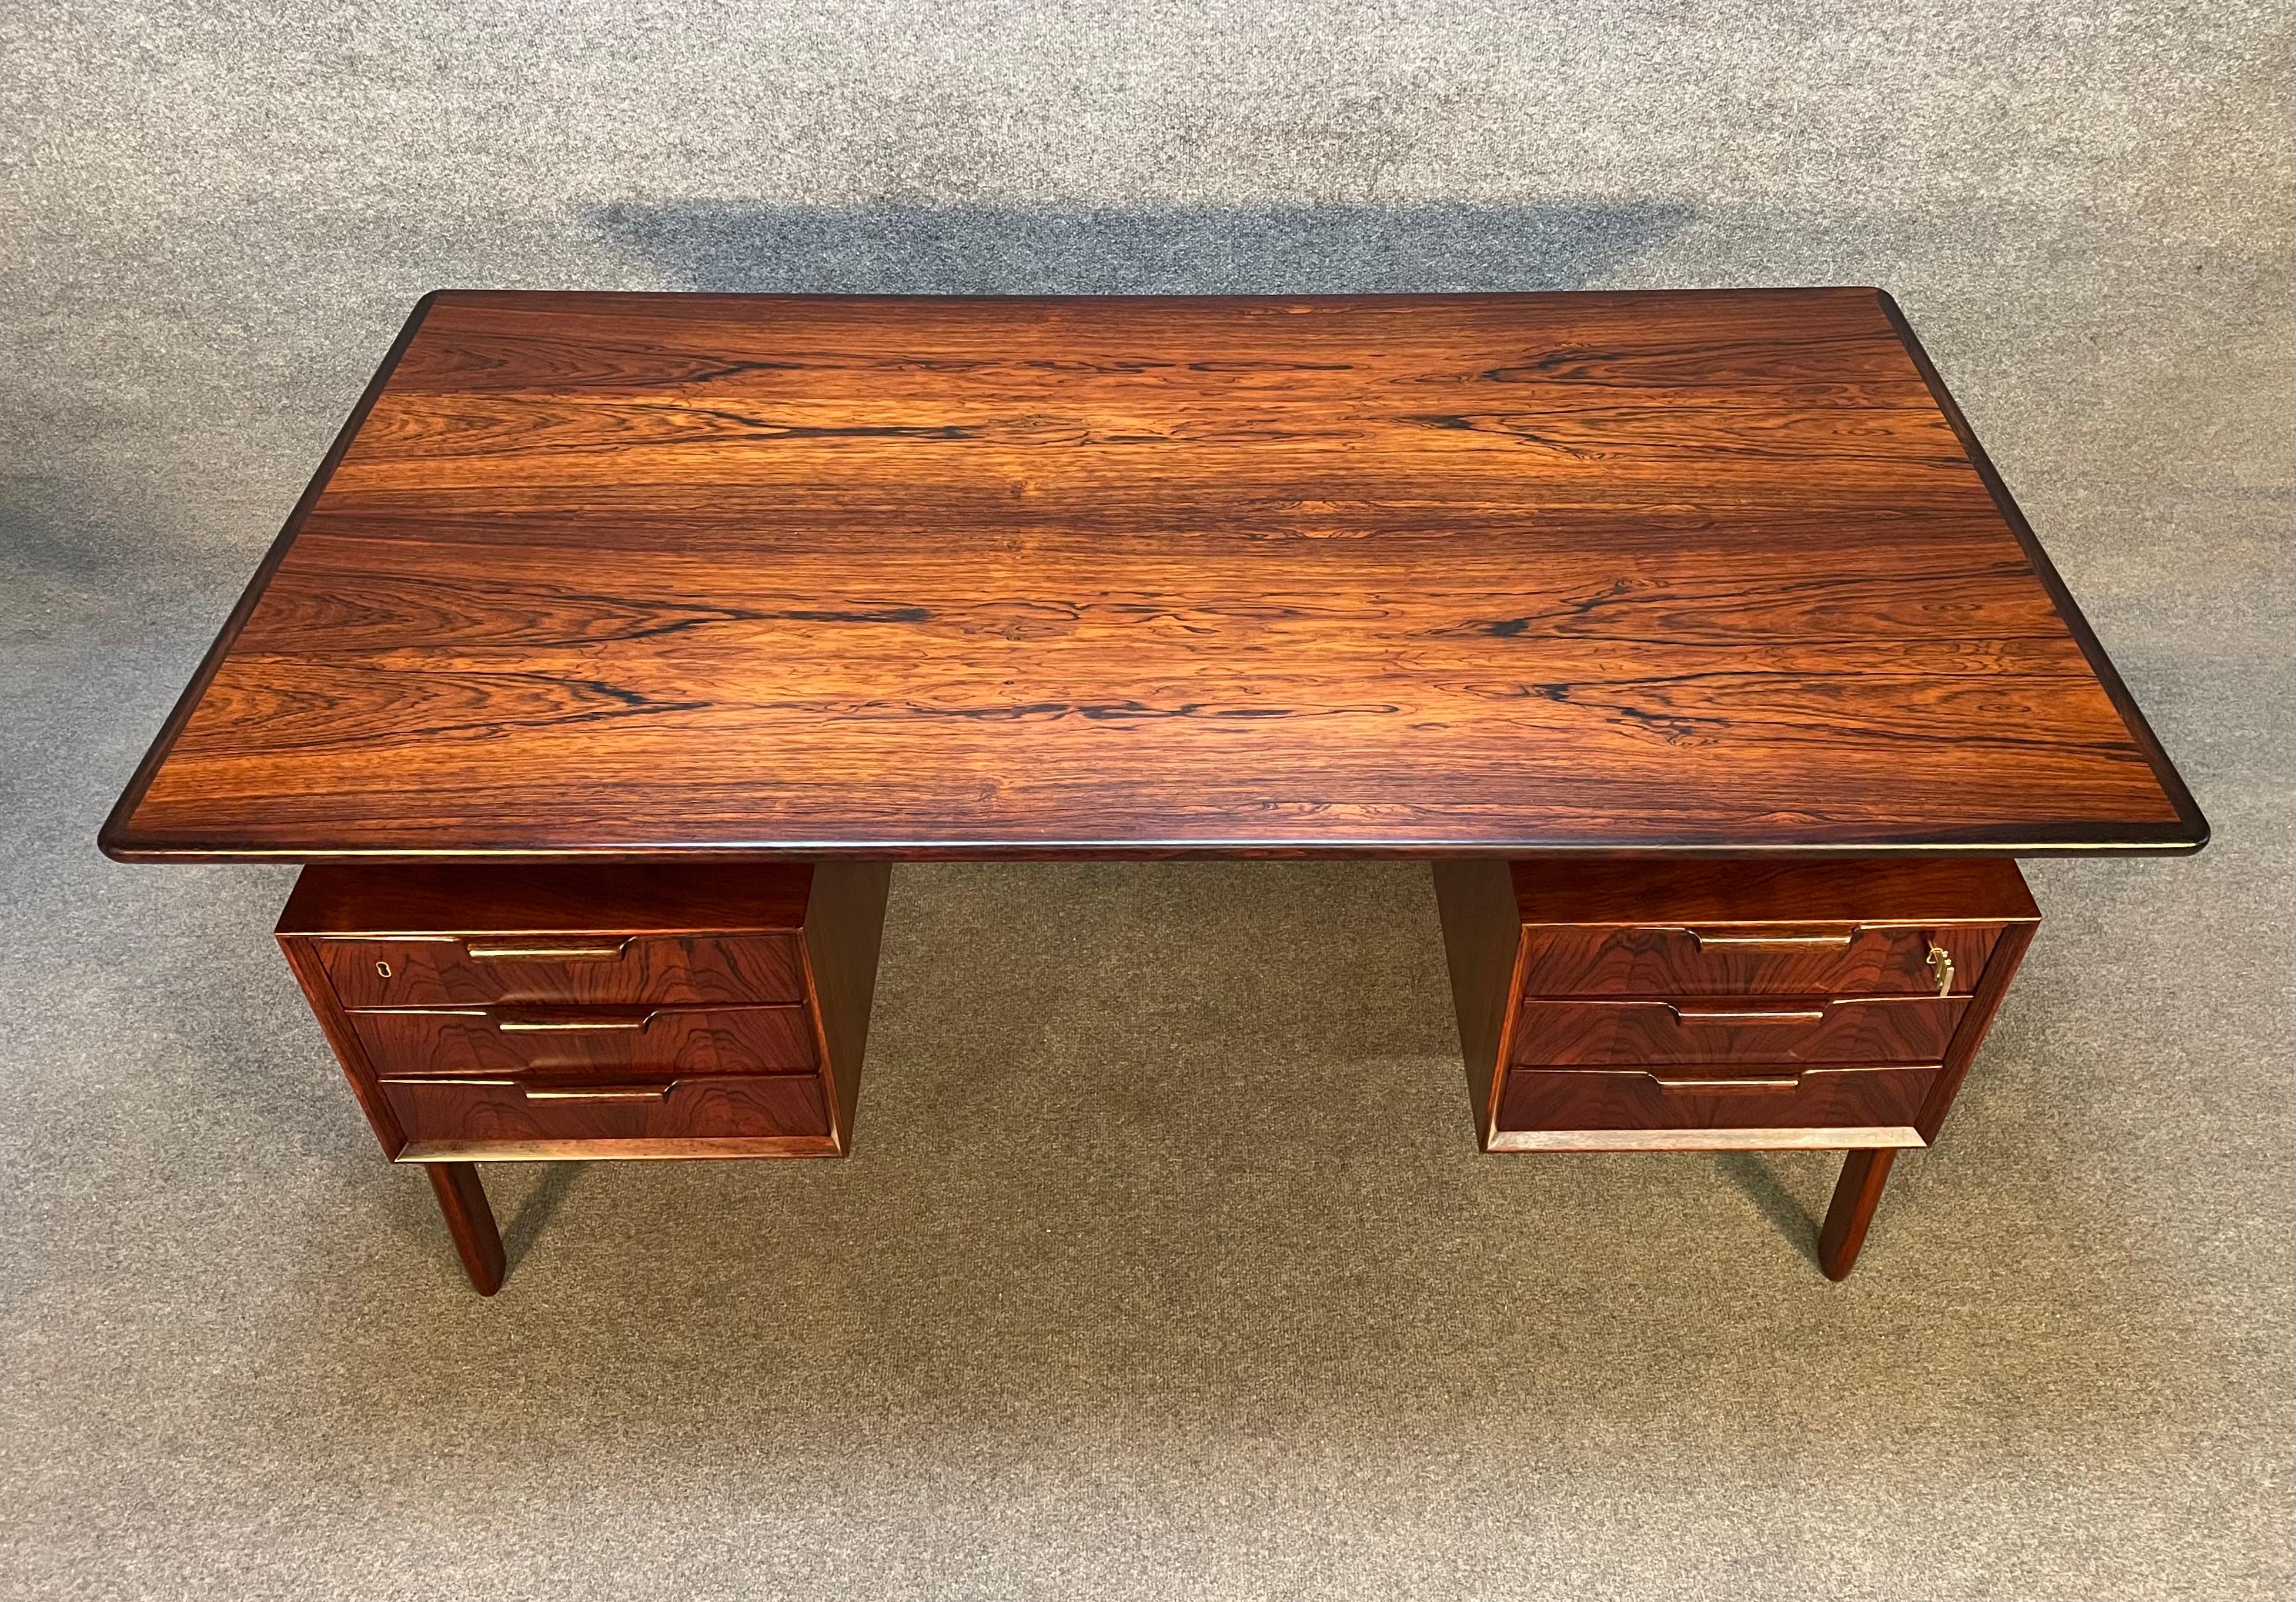 Here is the iconic Model 75 desk designed by Gunni Omann and manufactured by Omann Jun Mobelfabrik which was recently imported from Denmark to California before its restoration. This stunning 1960's Scandinavian modern desk in Brazilian rosewood